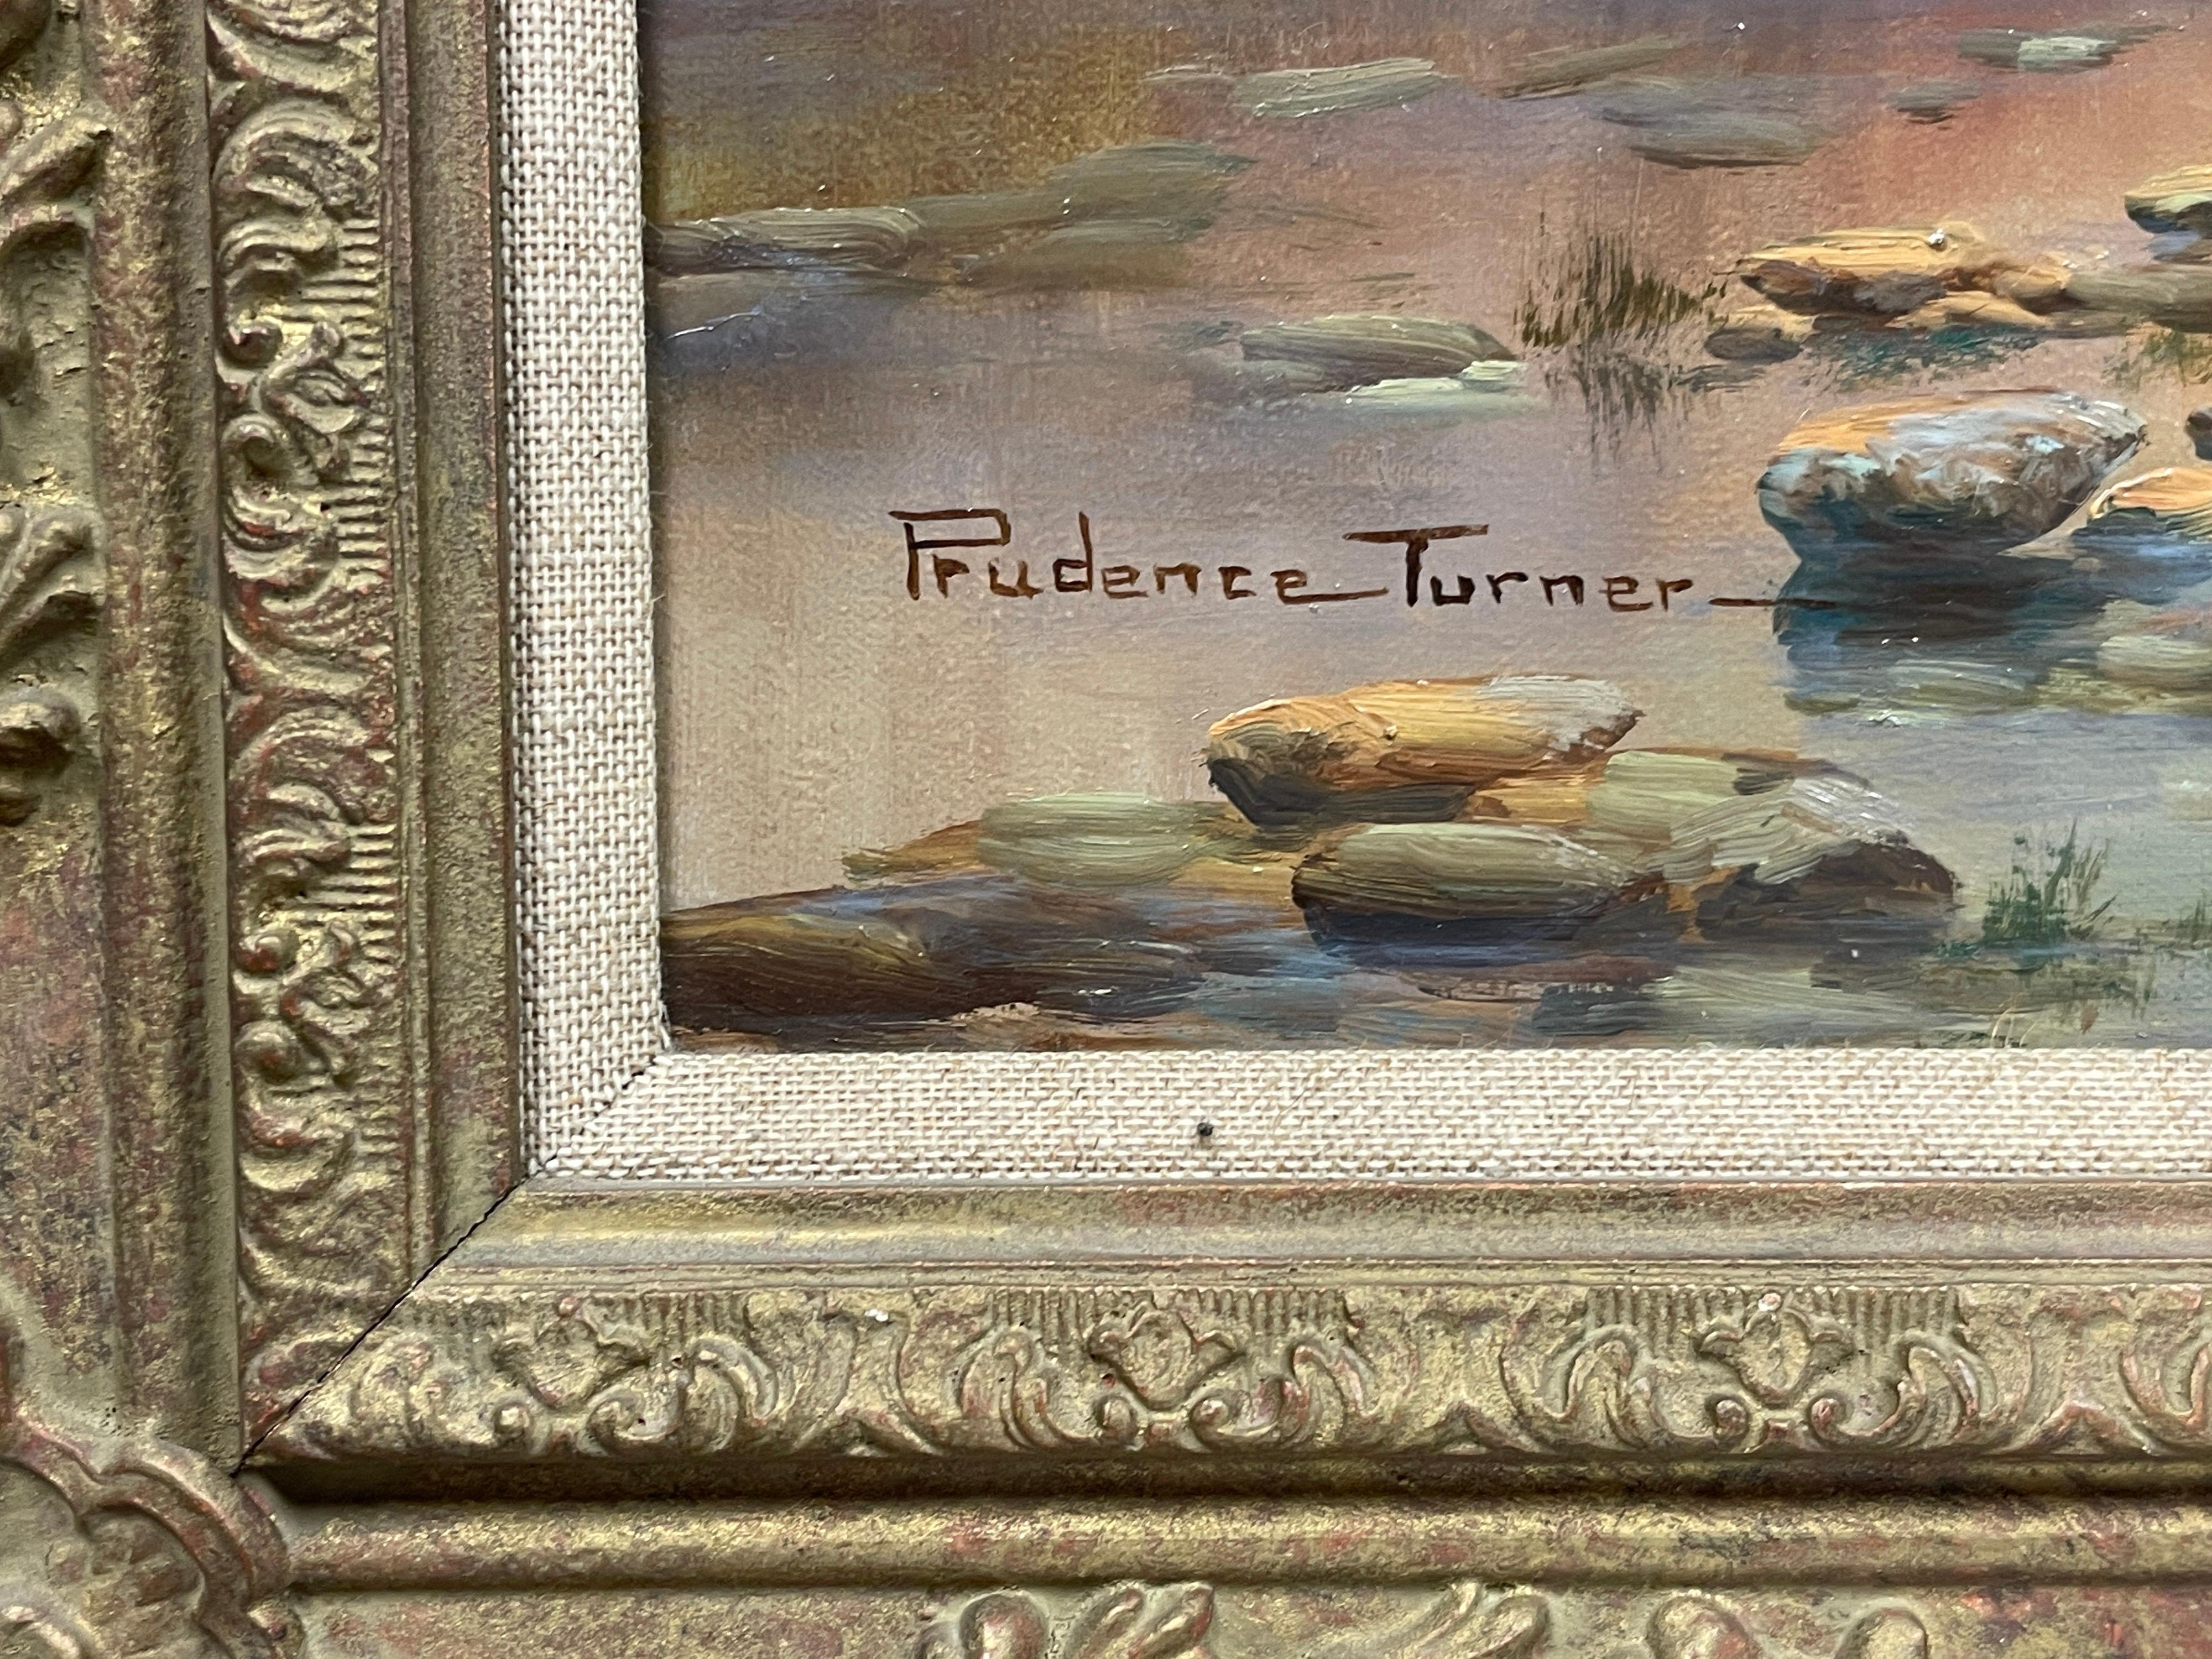 Large Signed Original Oil - Scottish Highlands Loch with Cattle Watering - Brown Animal Painting by Prudence Turner